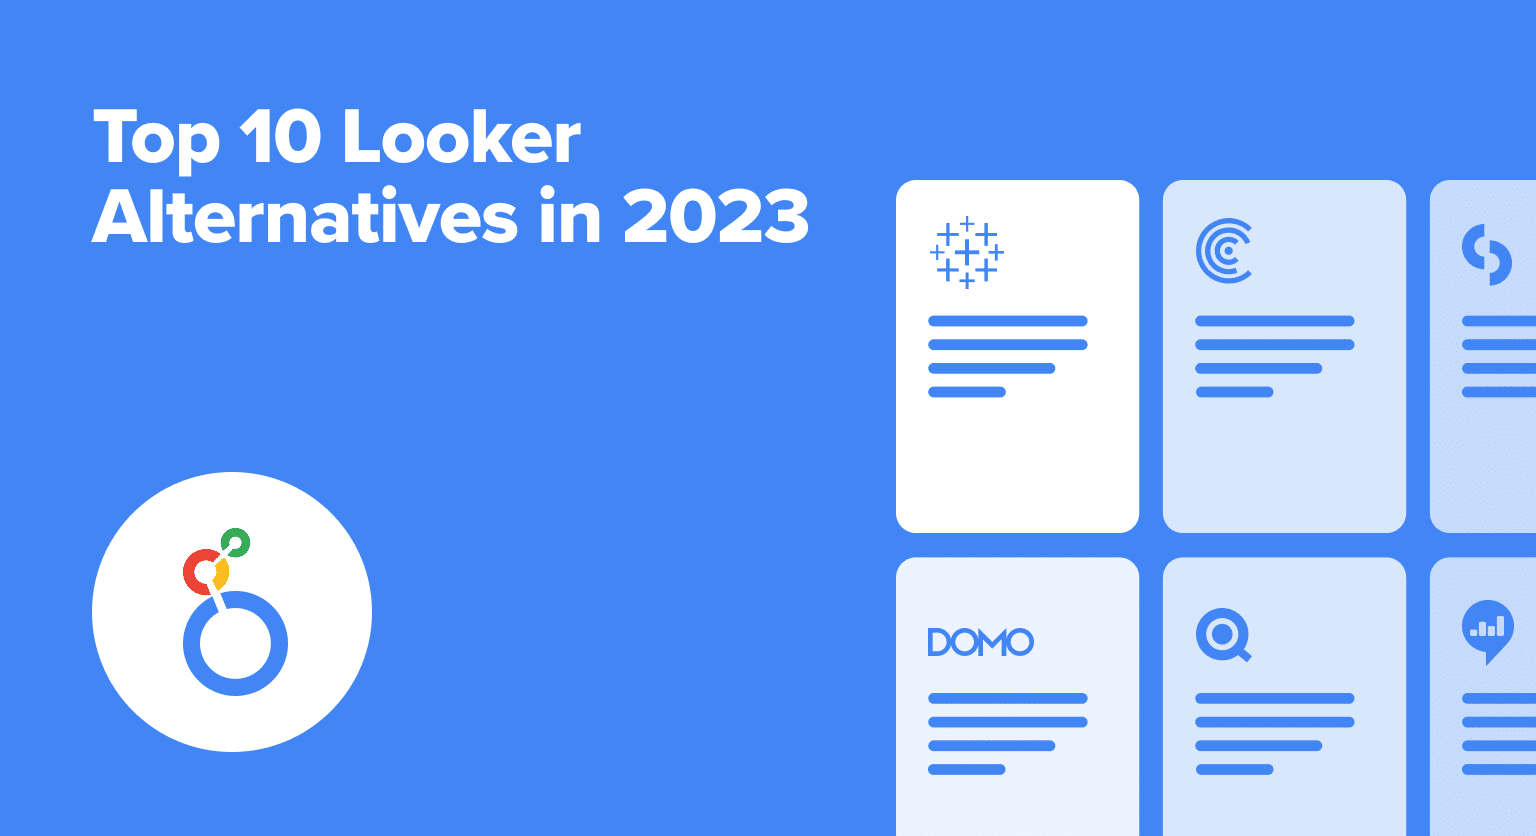 Explore top Looker alternatives in 2023 and unleash the potential of your data.